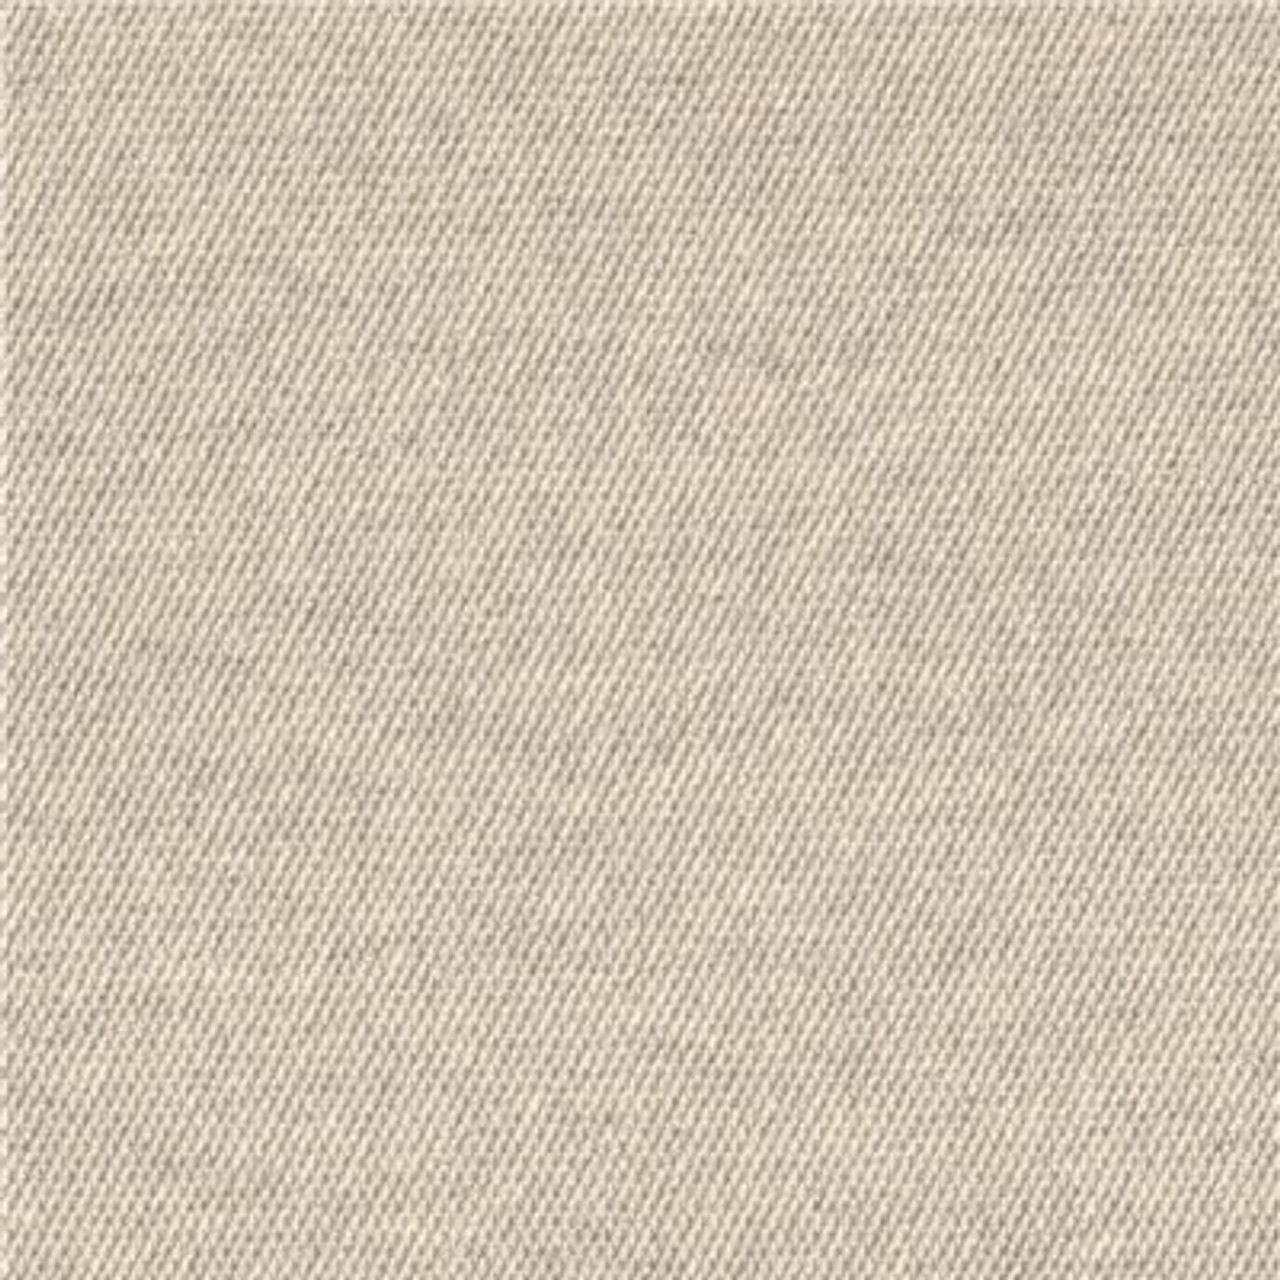 Foss Peel And Stick First Impressions Oatmeal Hobnail Texture 24 In. X 24 In. Commercial Carpet Tile (15 Tiles/Case)